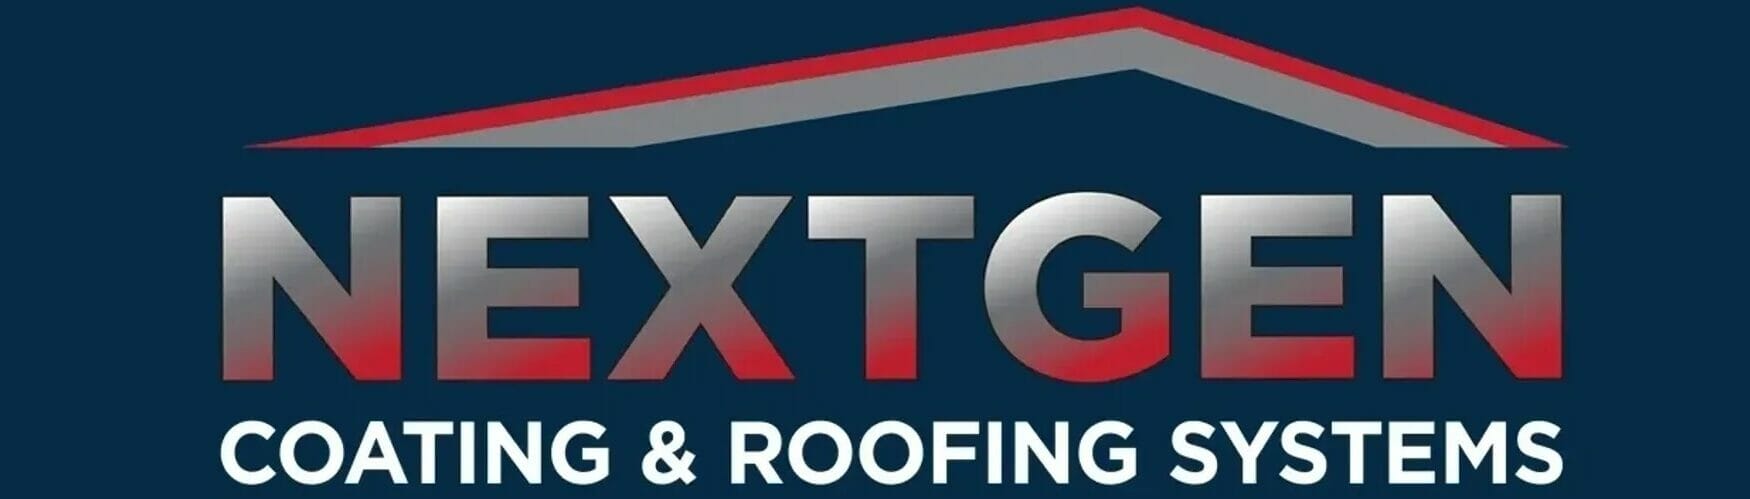 Next Gen Coating & Roofing Systems Icon